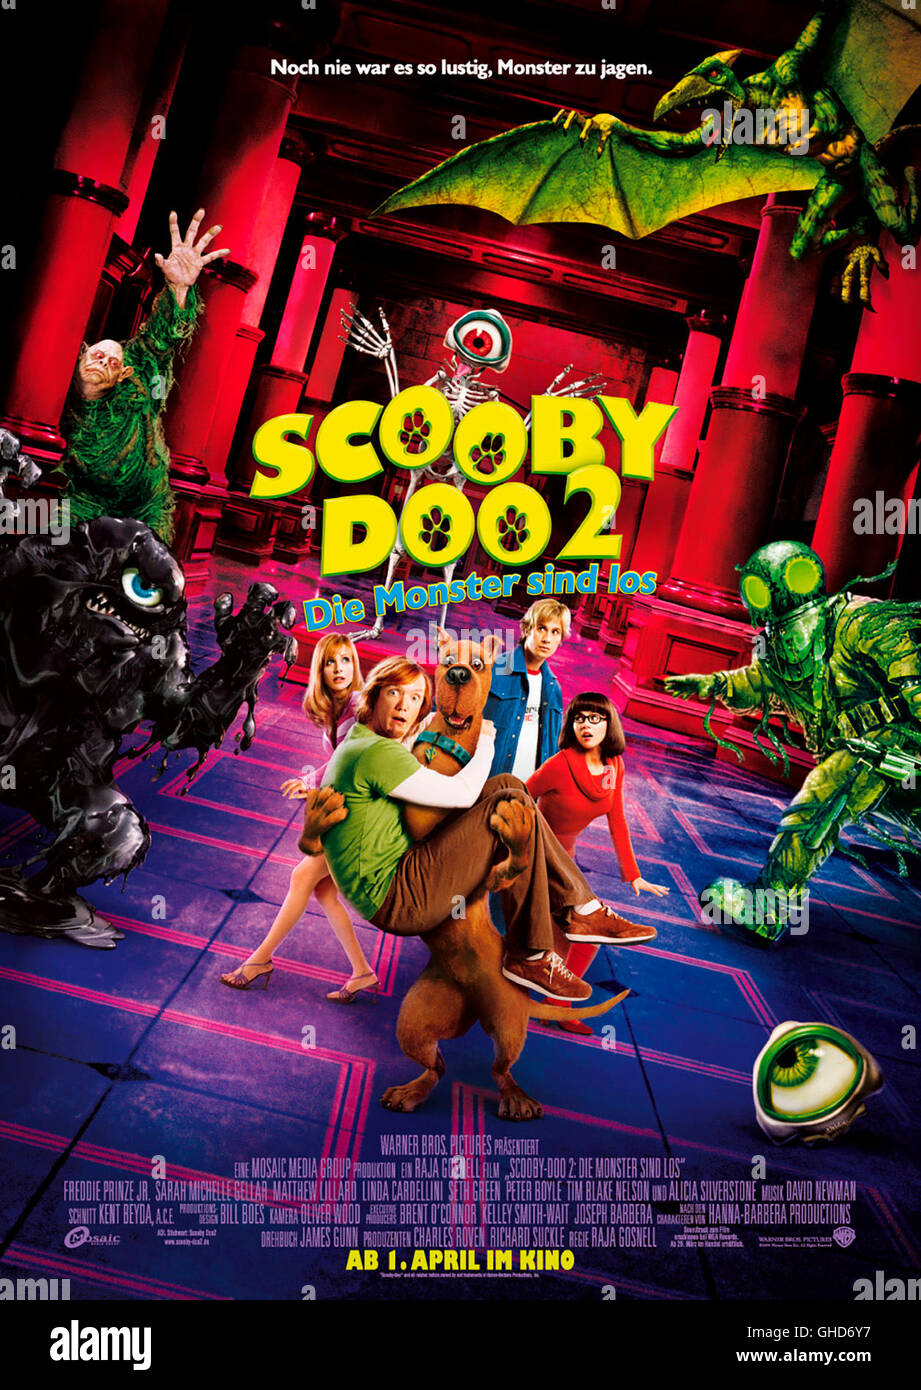 SCOOBY-DOO 2: DIE MONSTER SIND LOS / Scooby-Doo 2: Monsters Unleashed USA  2004 / Raja Gosnell Filmplakat Regie: Raja Gosnell aka. Scooby-Doo 2:  Monsters Unleashed Stock Photo - Alamy